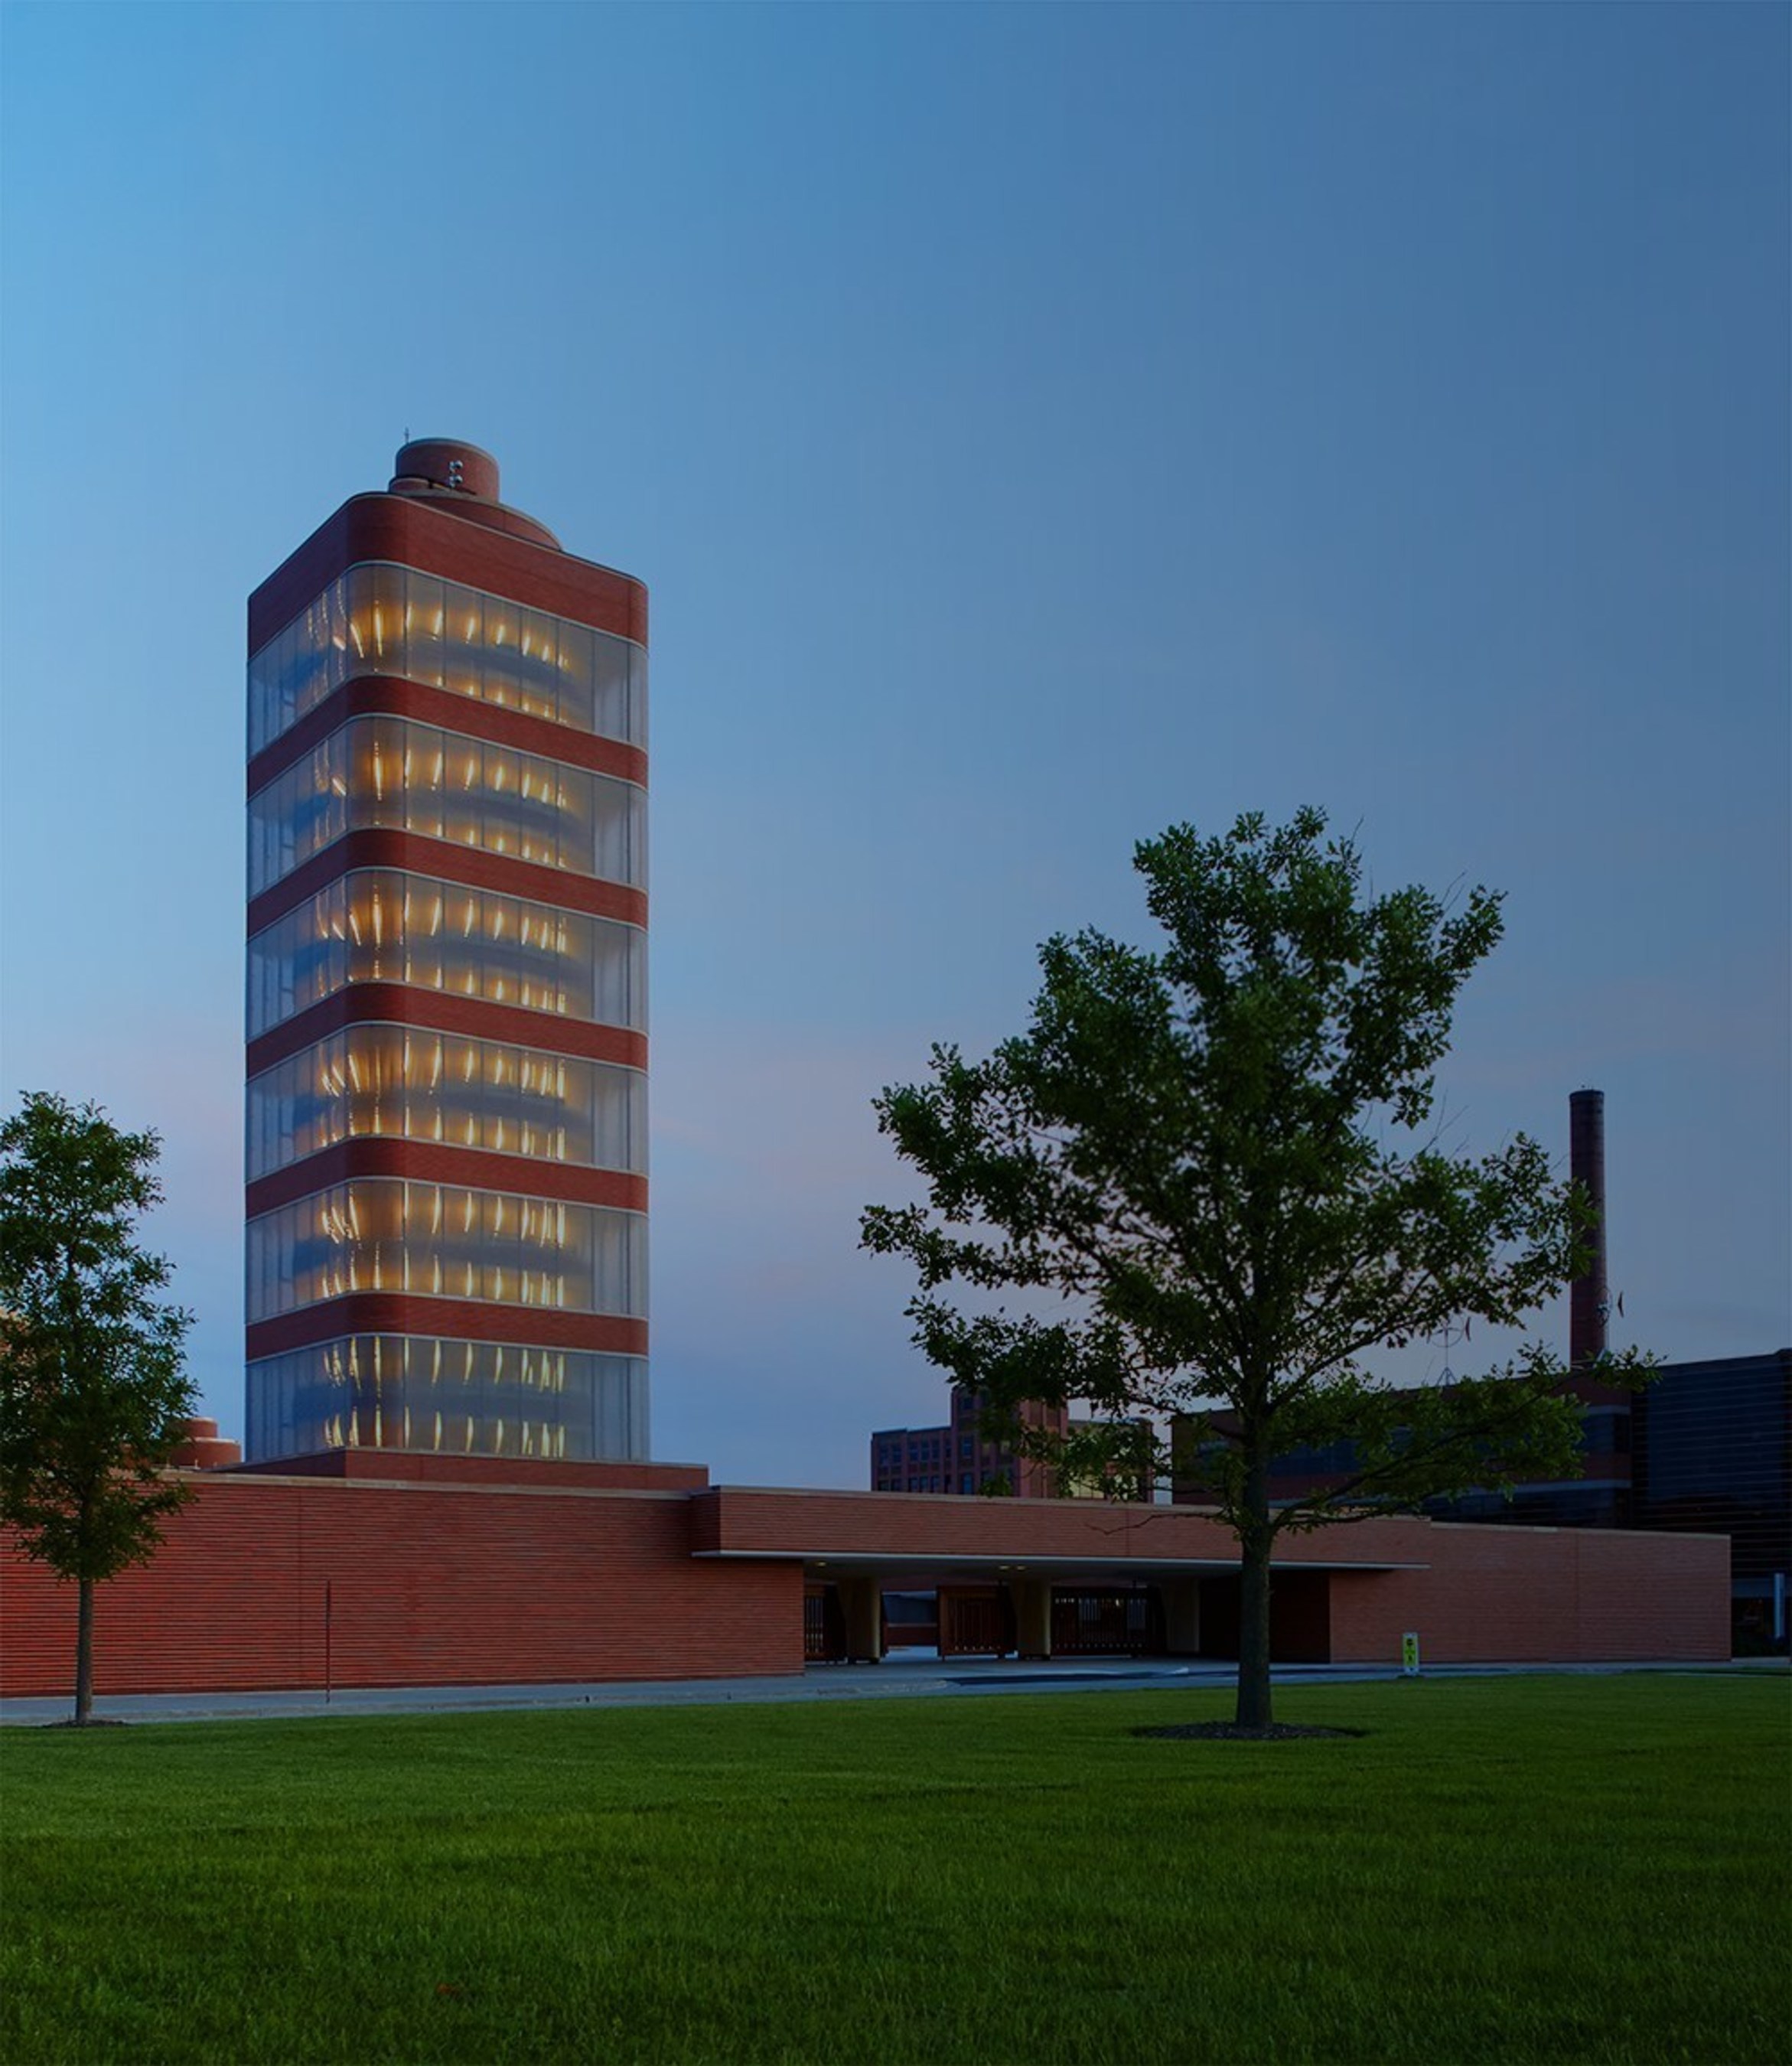 SC Johnson's research tower in Racine, Wisconsin, designed by Frank Lloyd Wright.